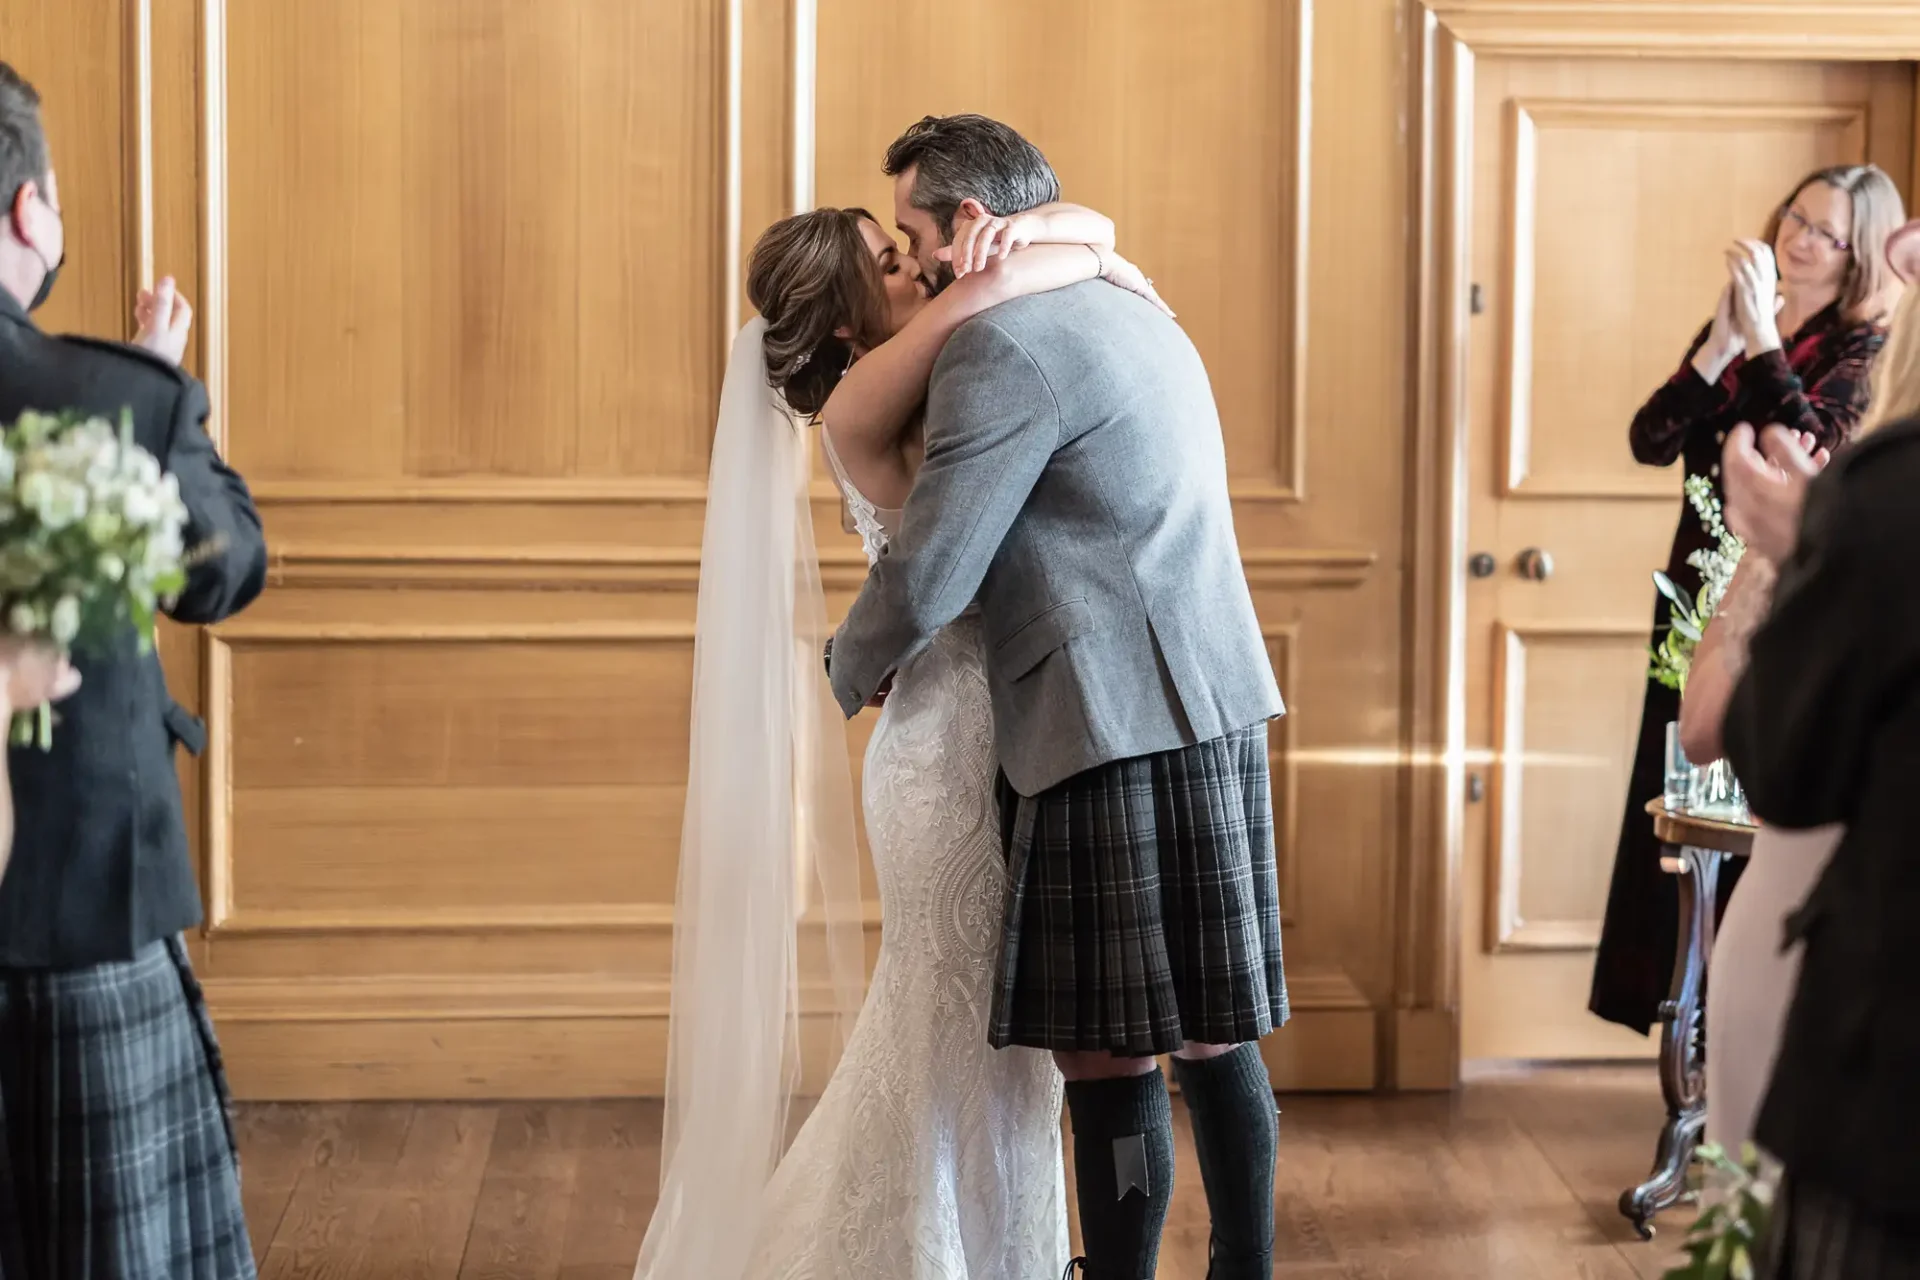 A bride and groom kiss passionately in a wood-paneled room while guests, some in kilts, watch from the sides.